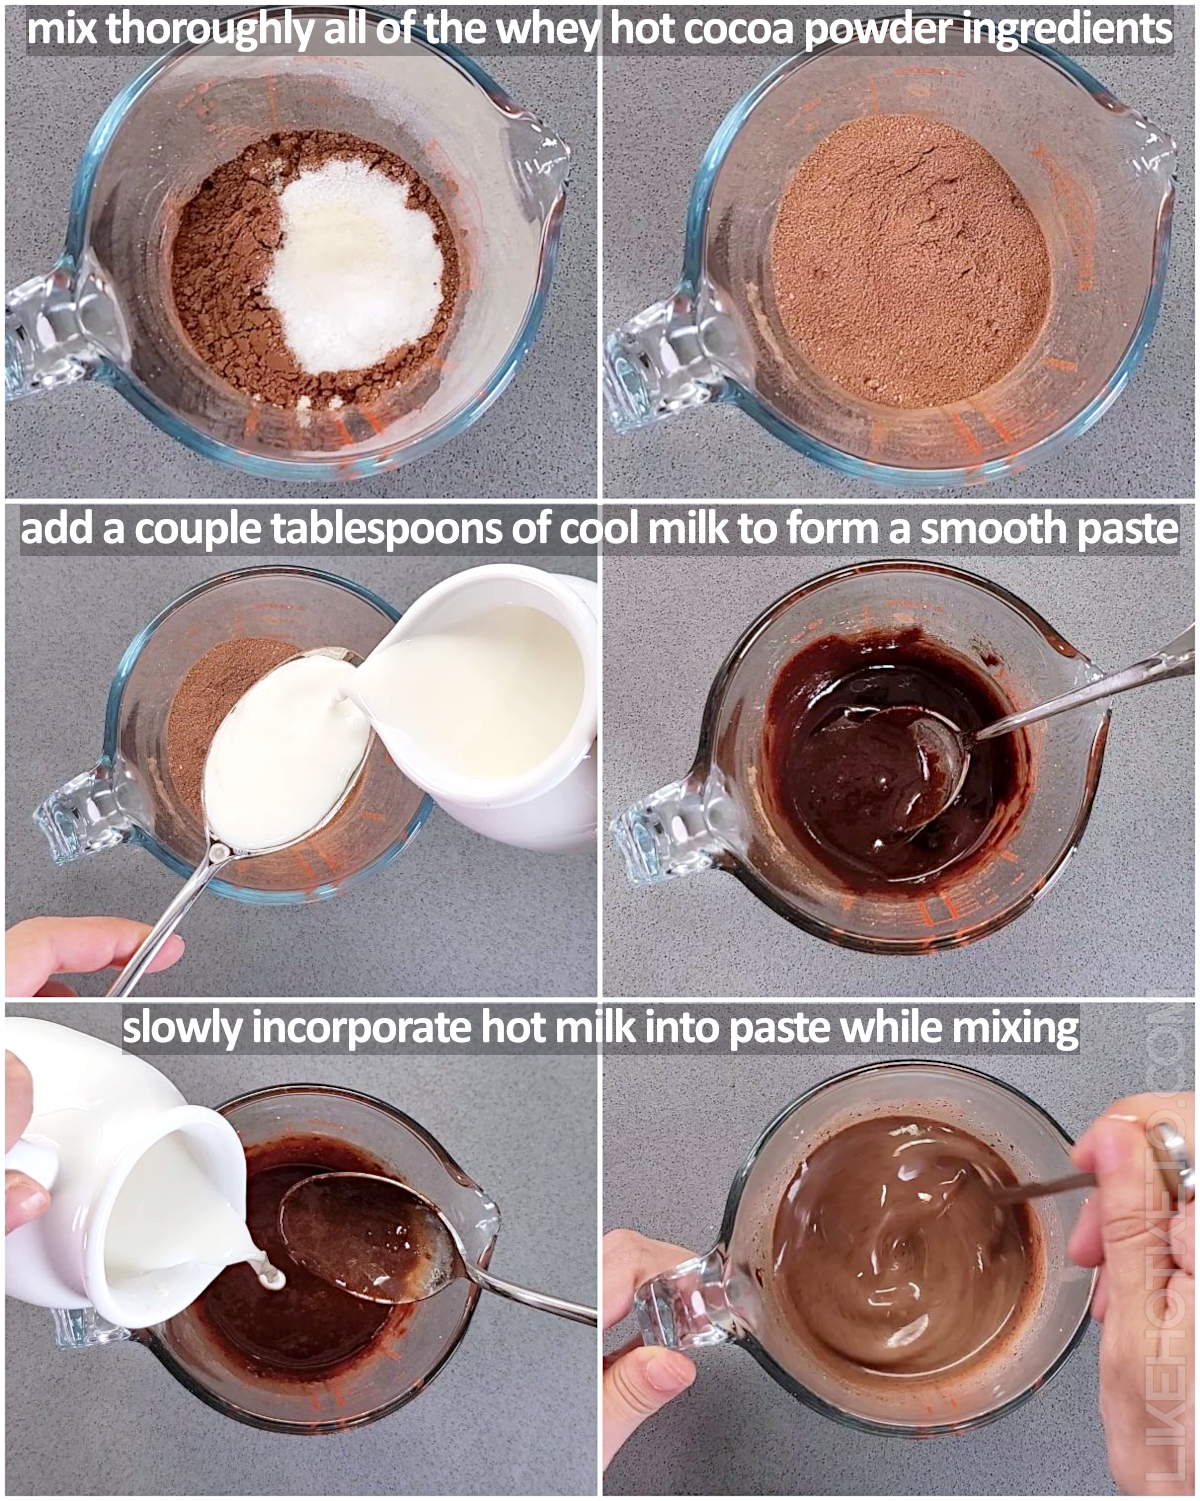 Step by step instructions of how to mix the whey protein hot chocolate.